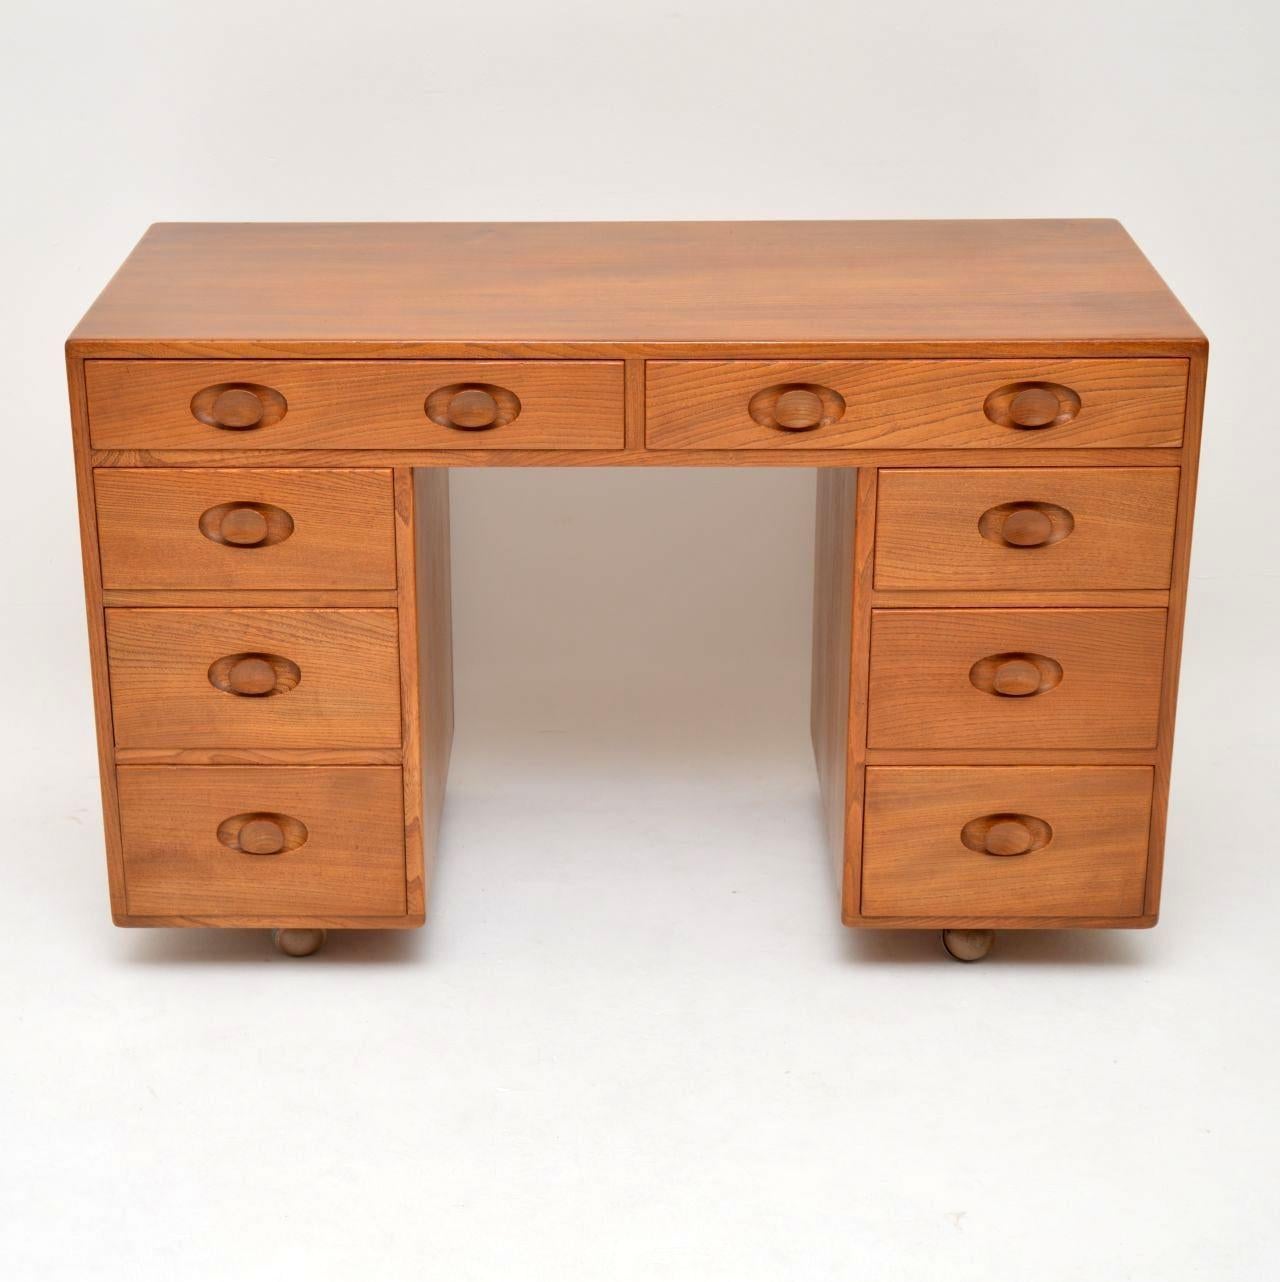 A very rare and extremely well made desk by Ercol, this dates from the 1960s-1970s. It’s in beautiful solid elmwood, and as with all Ercol products the quality is of the highest order. This is a very useful size and it’s in superb condition for its